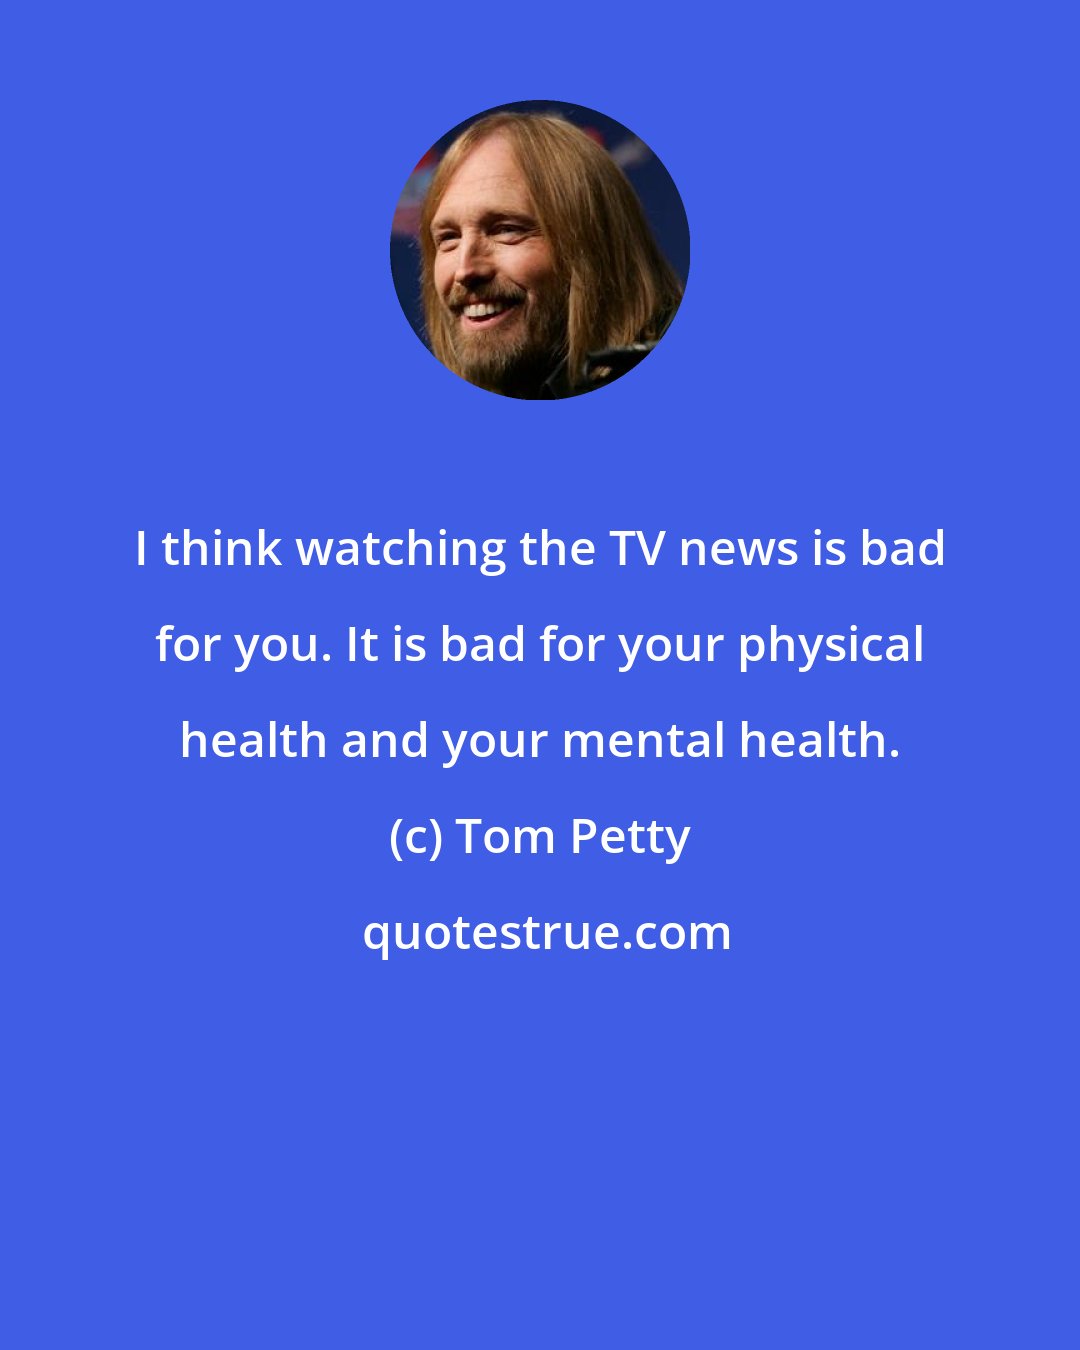 Tom Petty: I think watching the TV news is bad for you. It is bad for your physical health and your mental health.